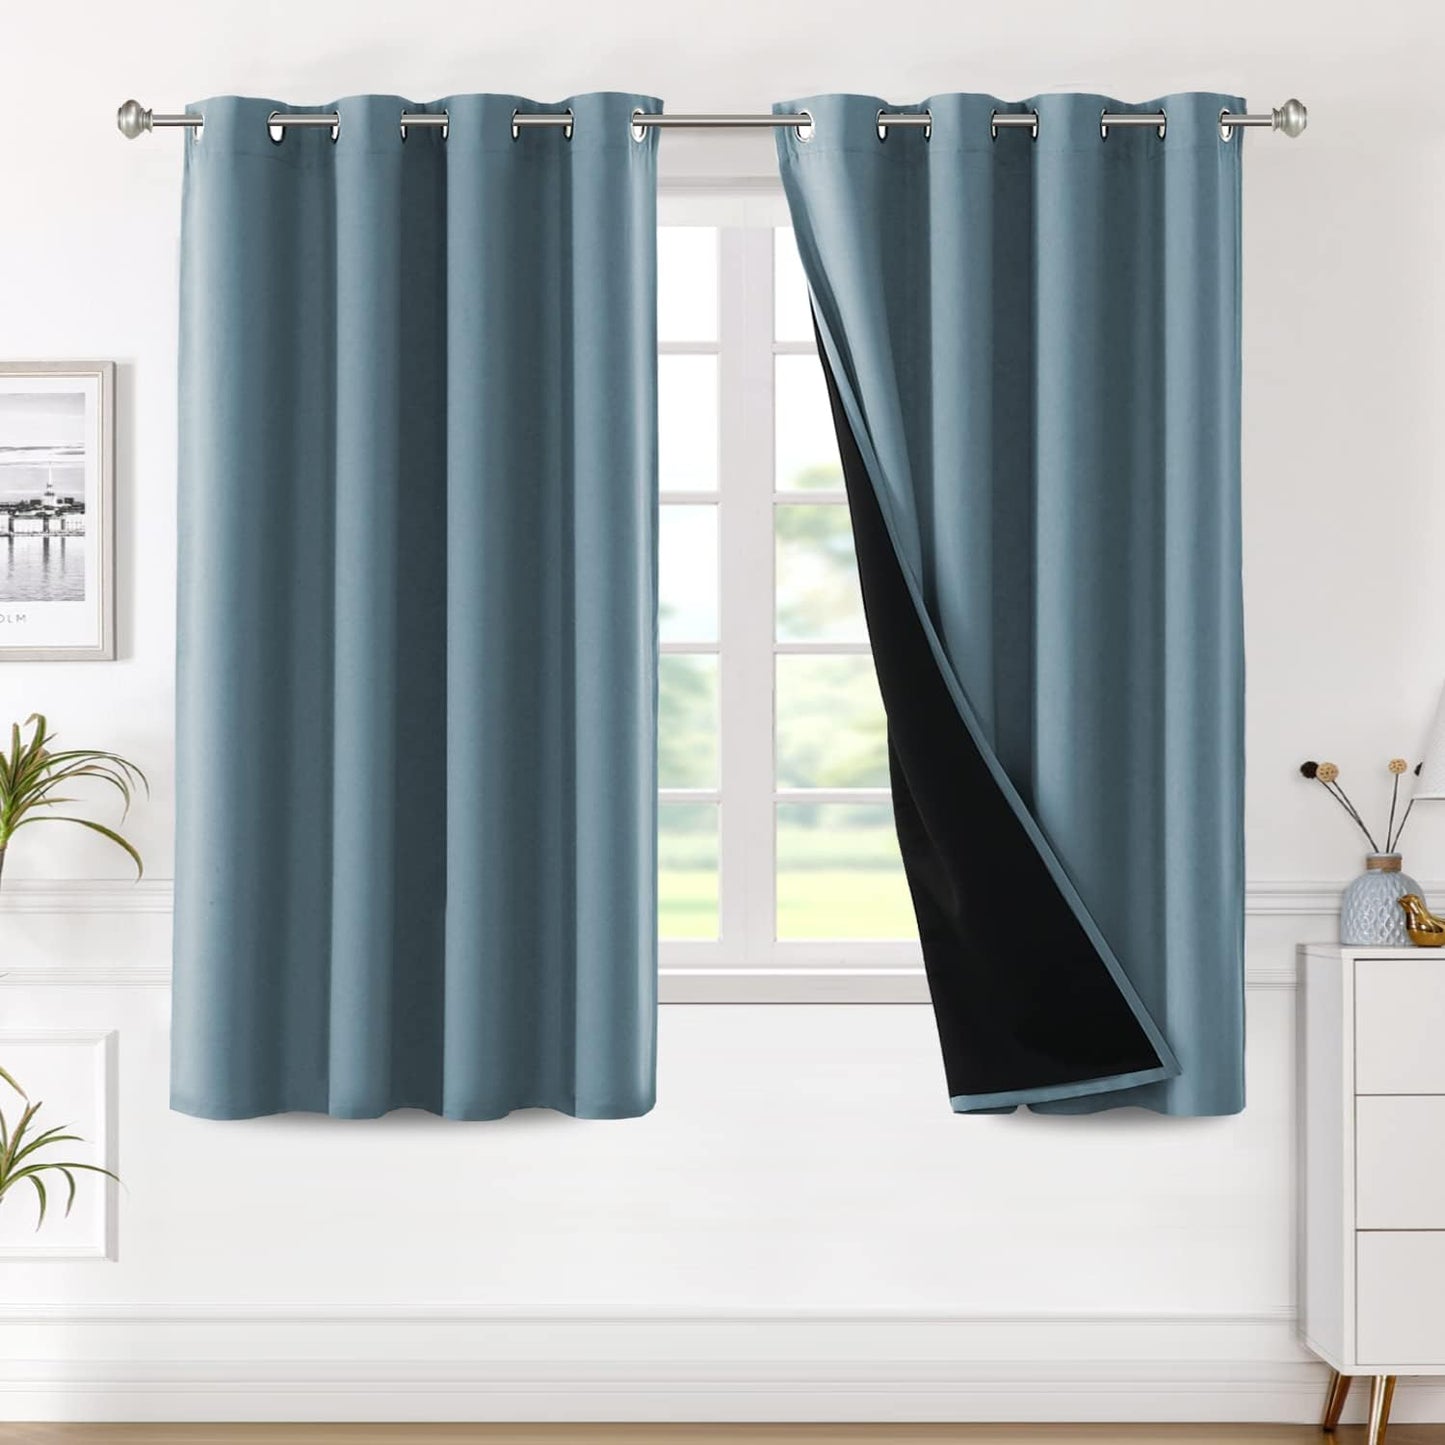 H.VERSAILTEX Blackout Curtains with Liner Backing, Thermal Insulated Curtains for Living Room, Noise Reducing Drapes, White, 52 Inches Wide X 96 Inches Long per Panel, Set of 2 Panels  H.VERSAILTEX Stone Blue 52"W X 63"L 